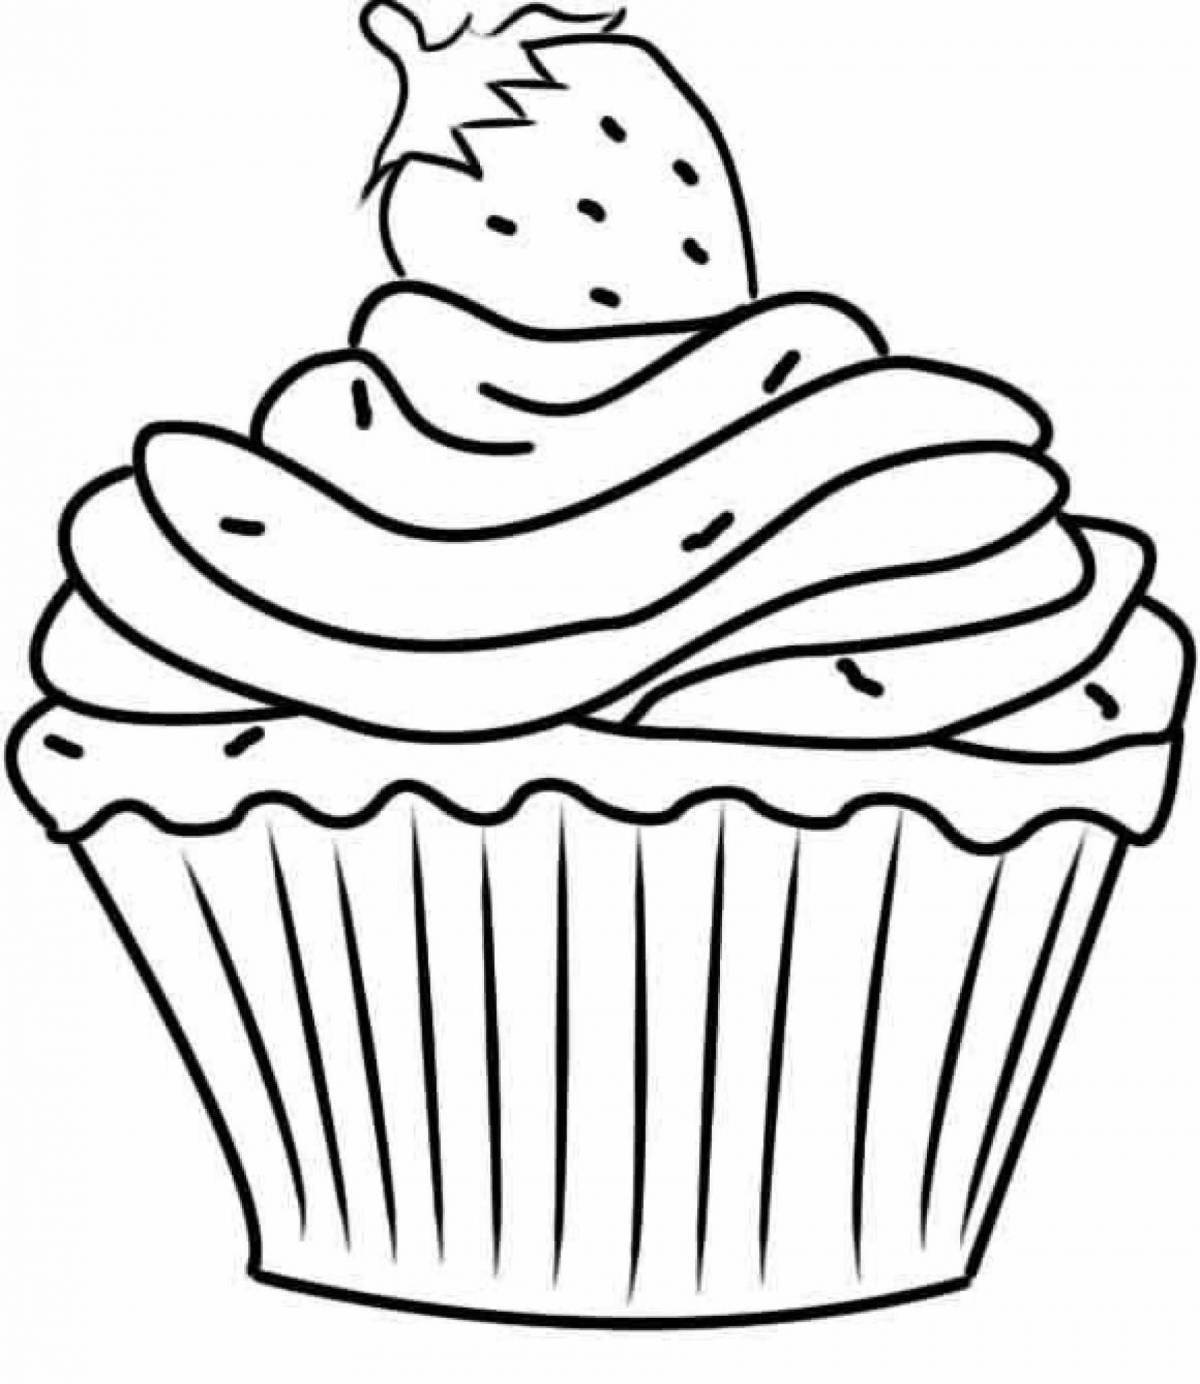 Color-frenzy cupcake coloring page for kids